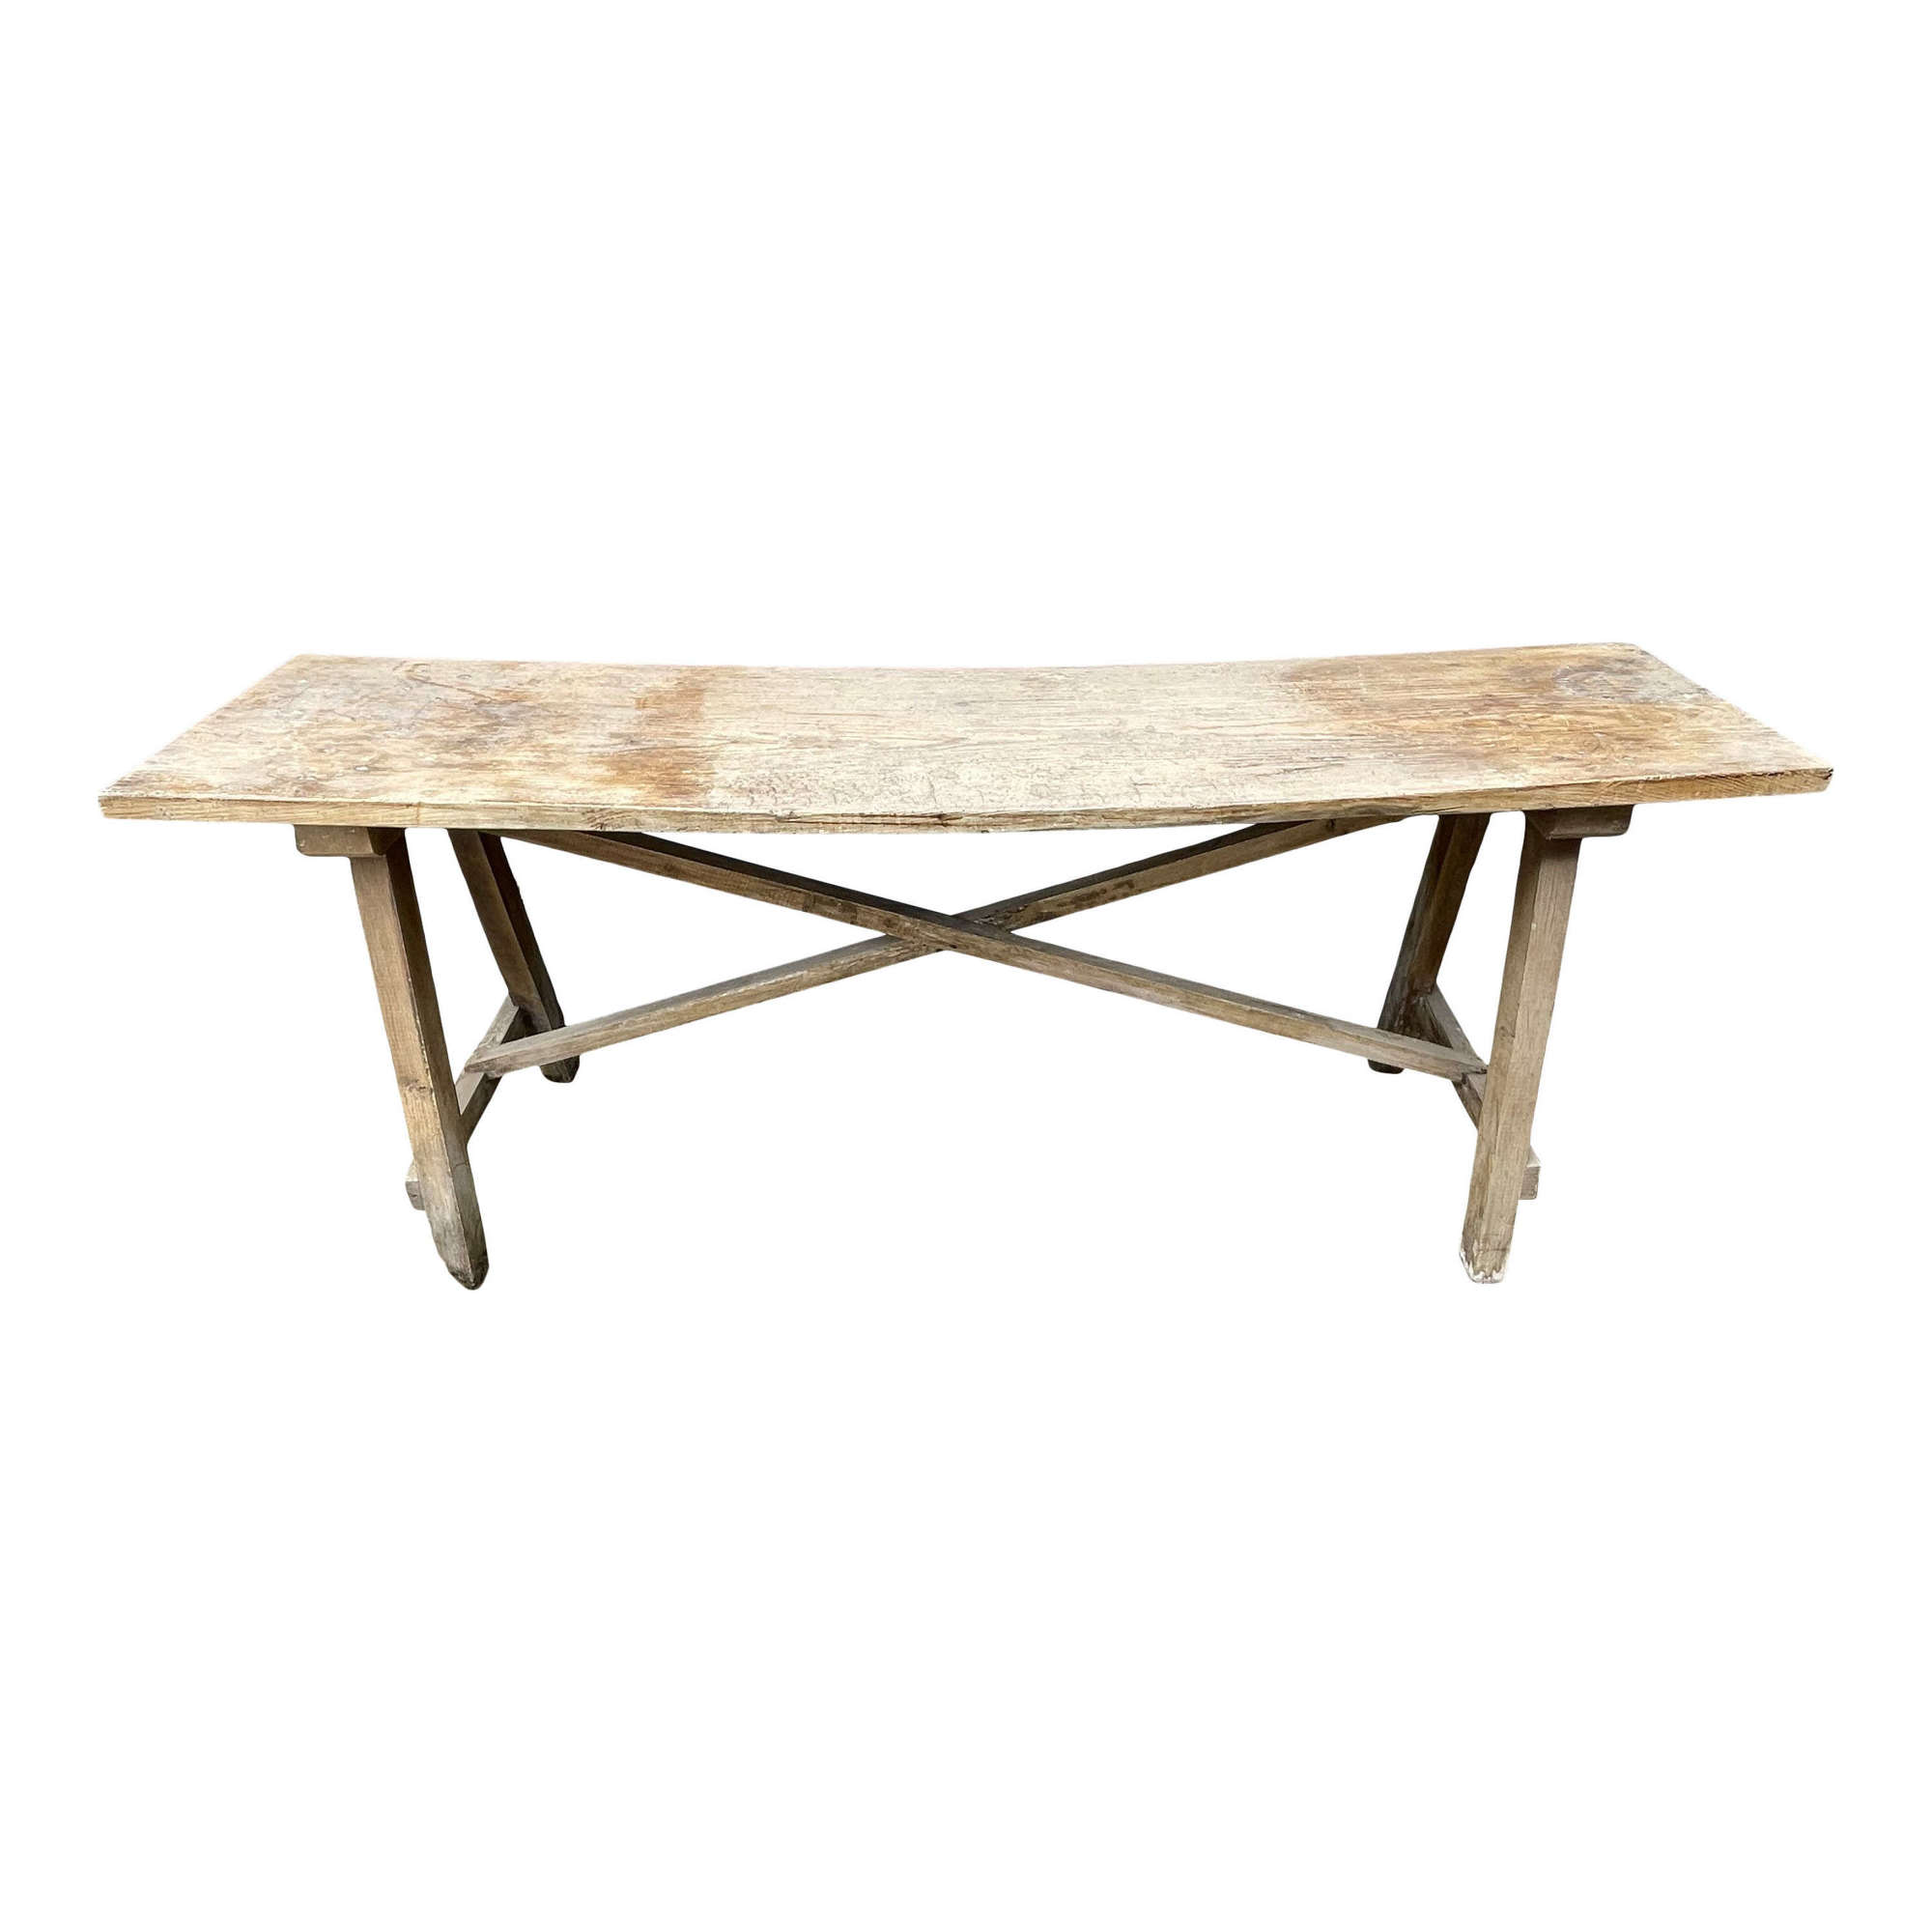 19th Century Pine and Oak Tavern Table